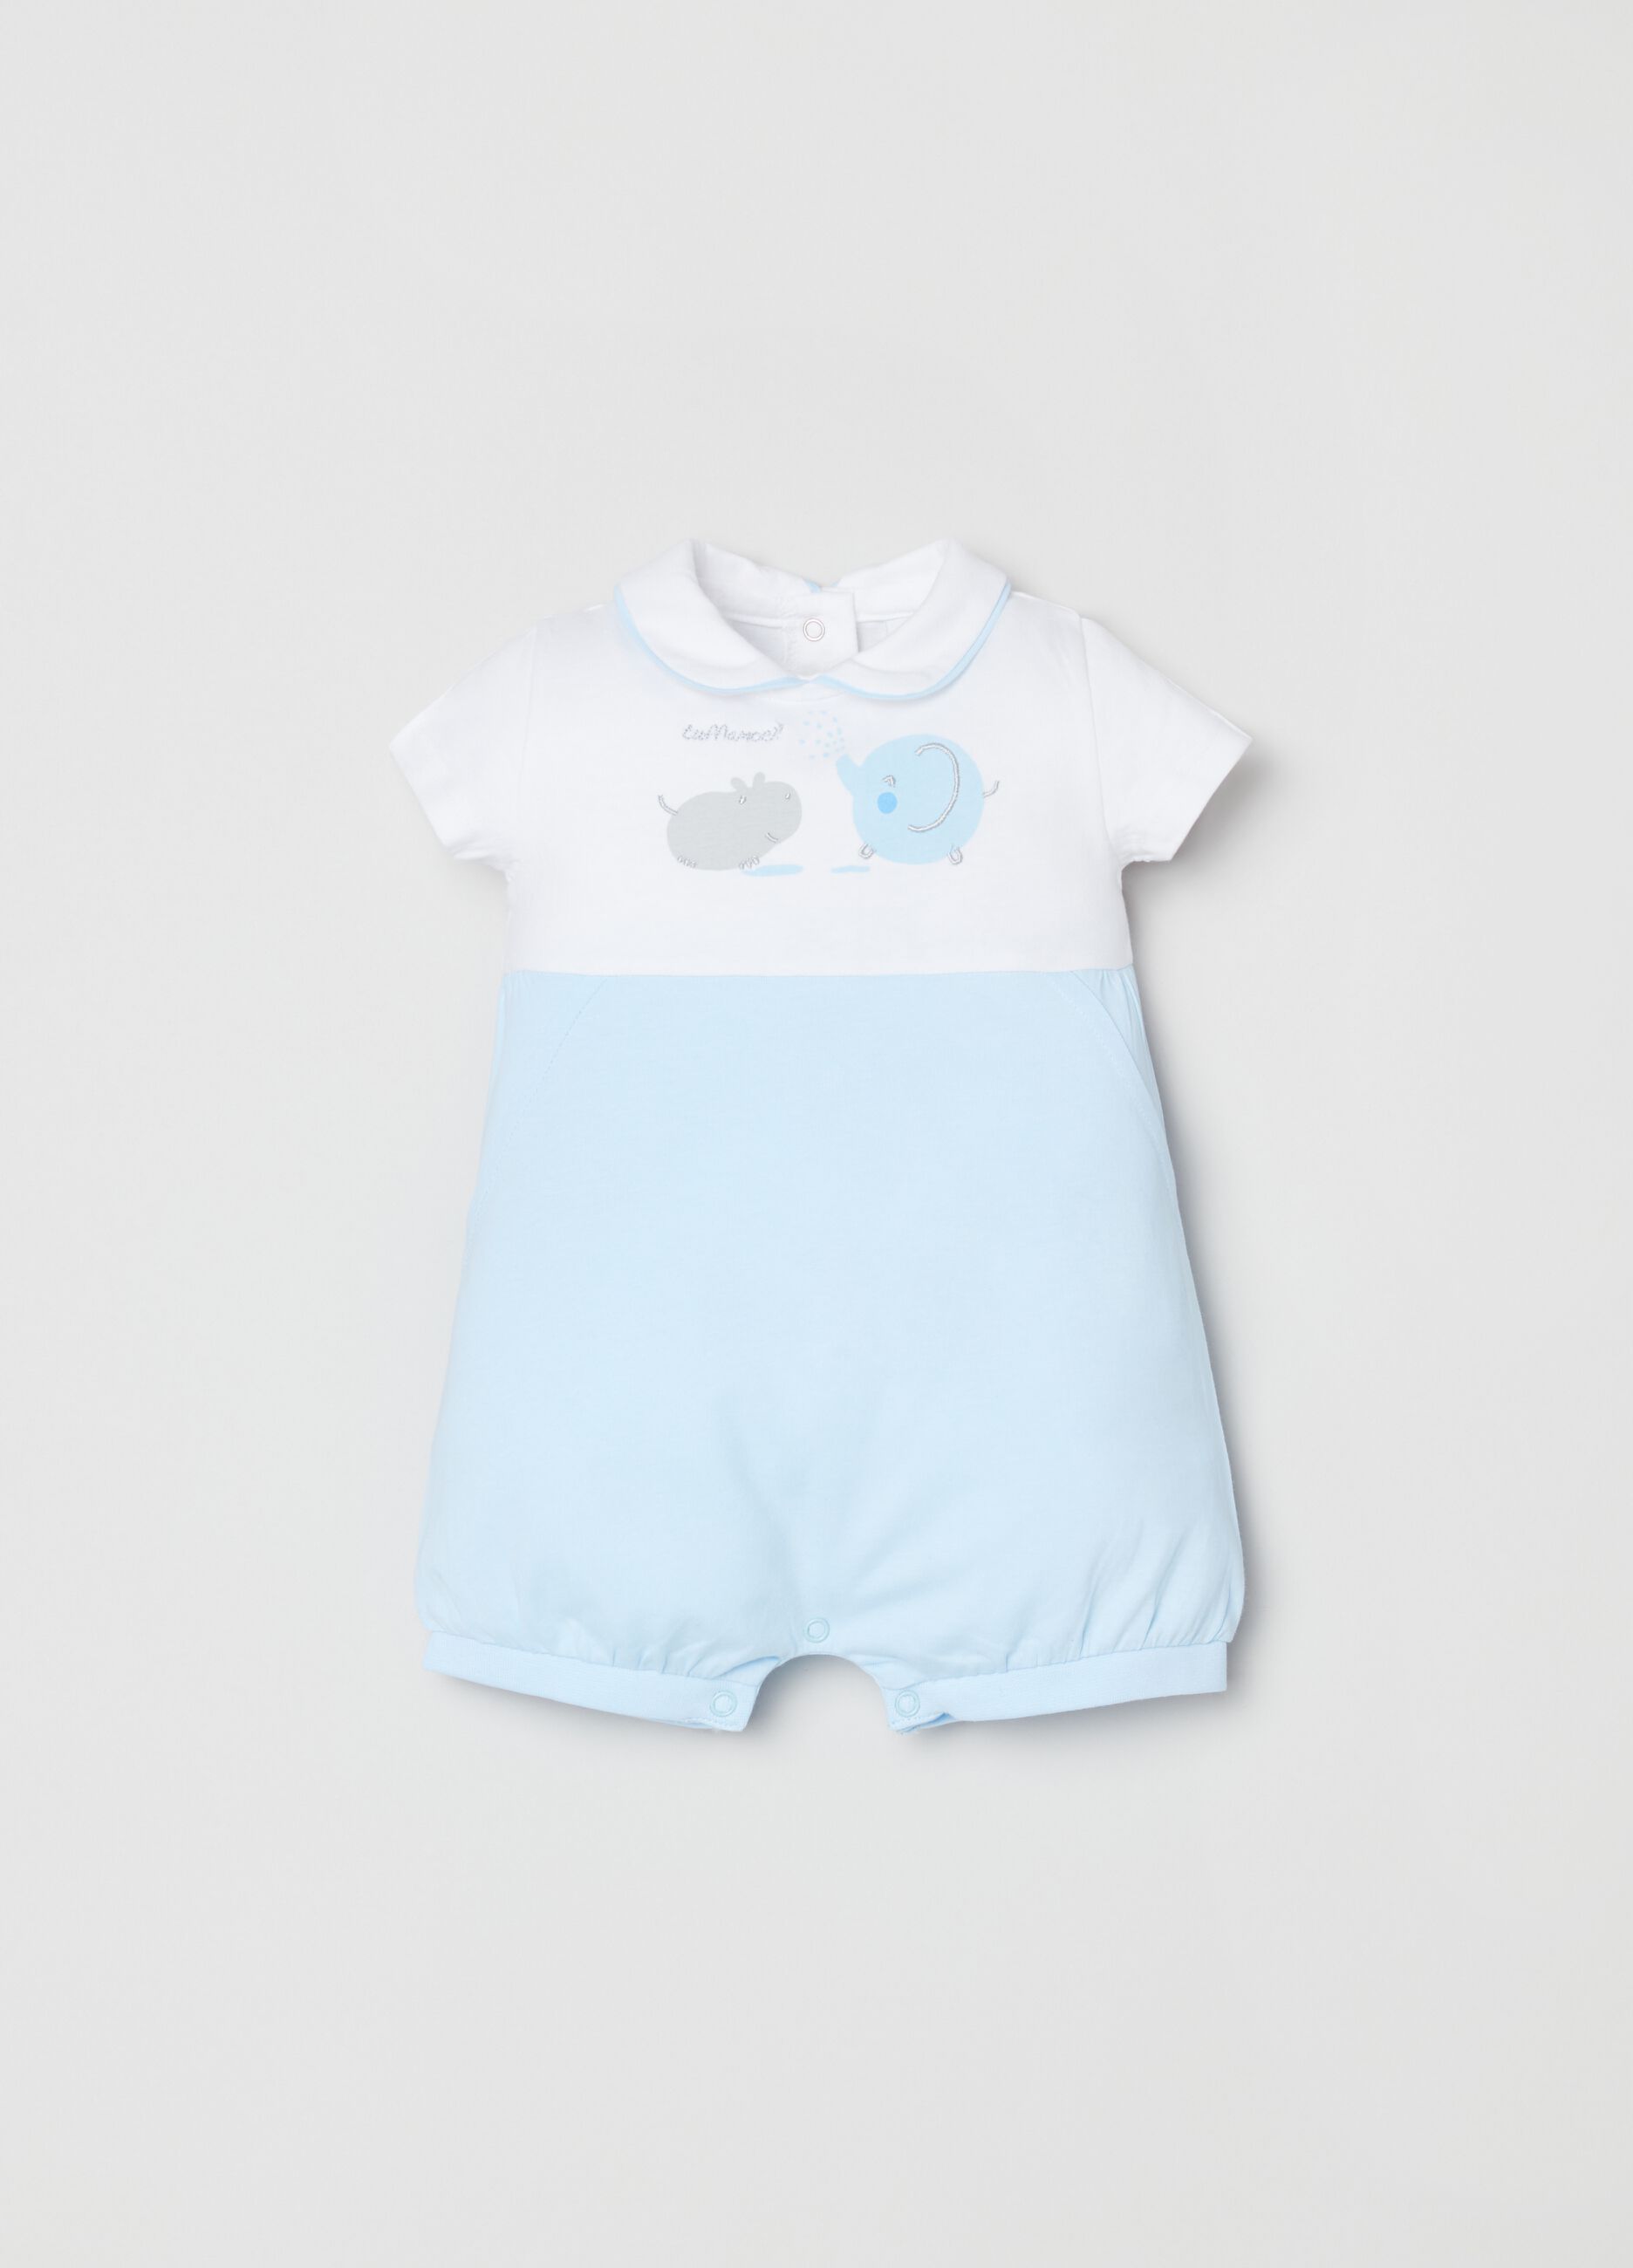 Cotton romper suit with animal print